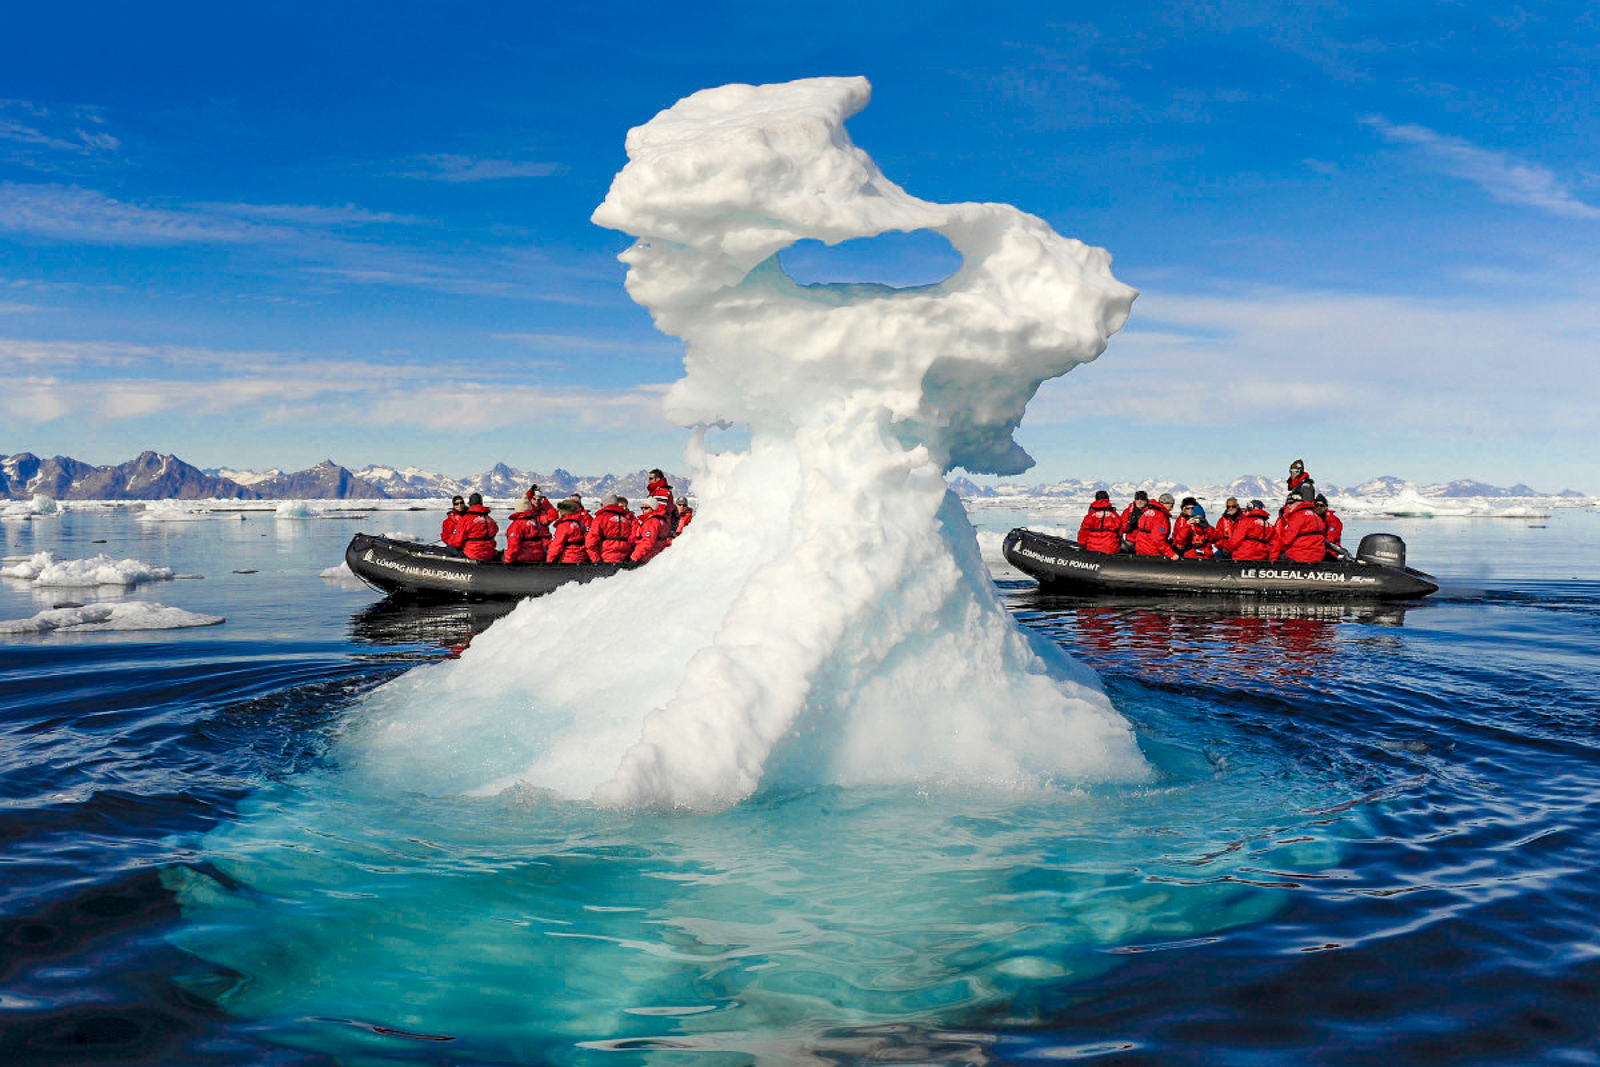 Ponant Arctic cruise guests on zodiac safari viewing iceberg formations 